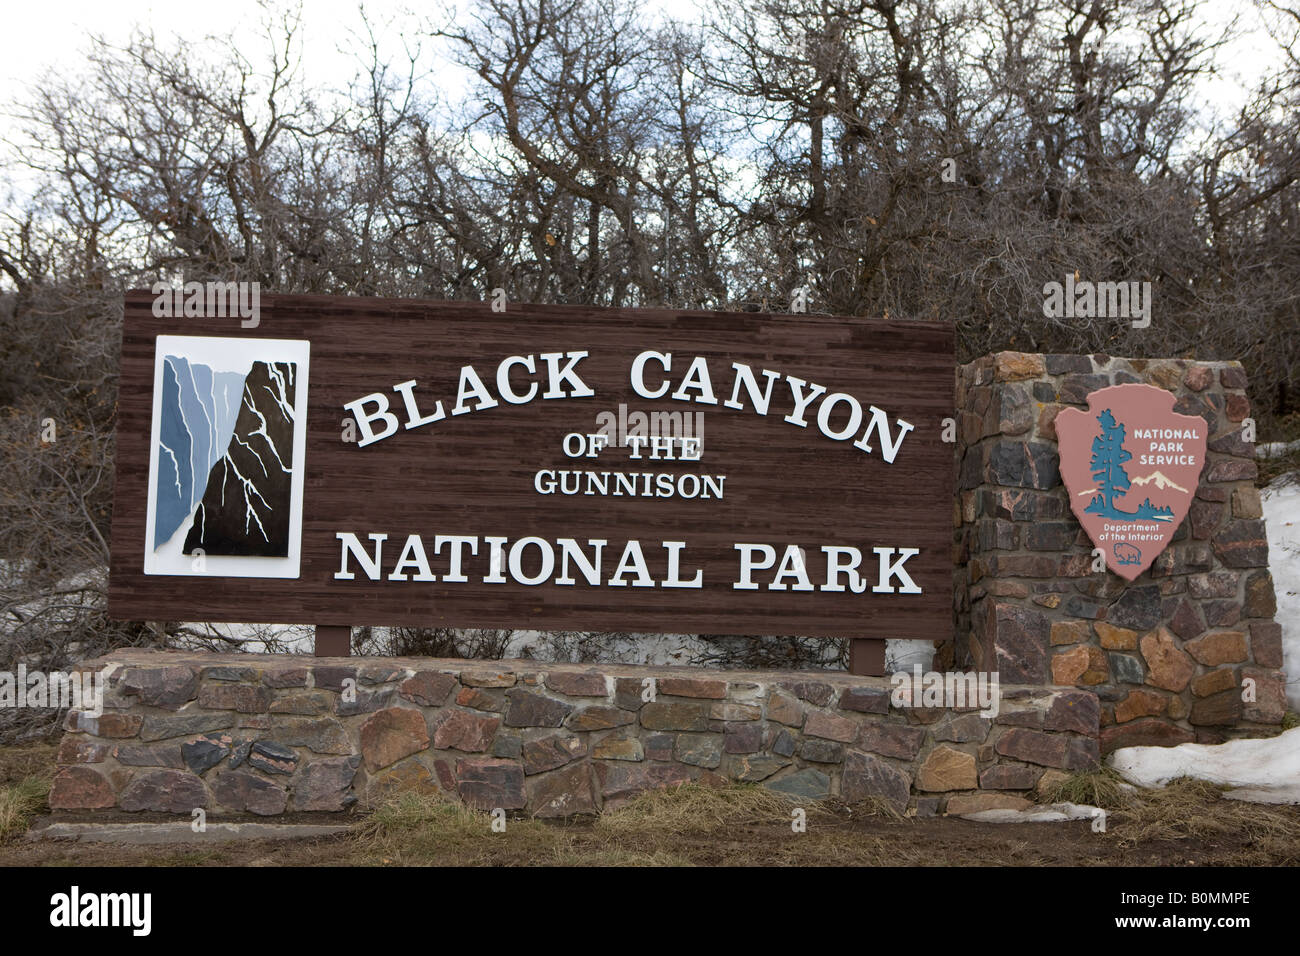 National Park Service welcome sign at the southern entrance to Black Canyon of the Gunnison National Park South Rim Colorado USA Stock Photo